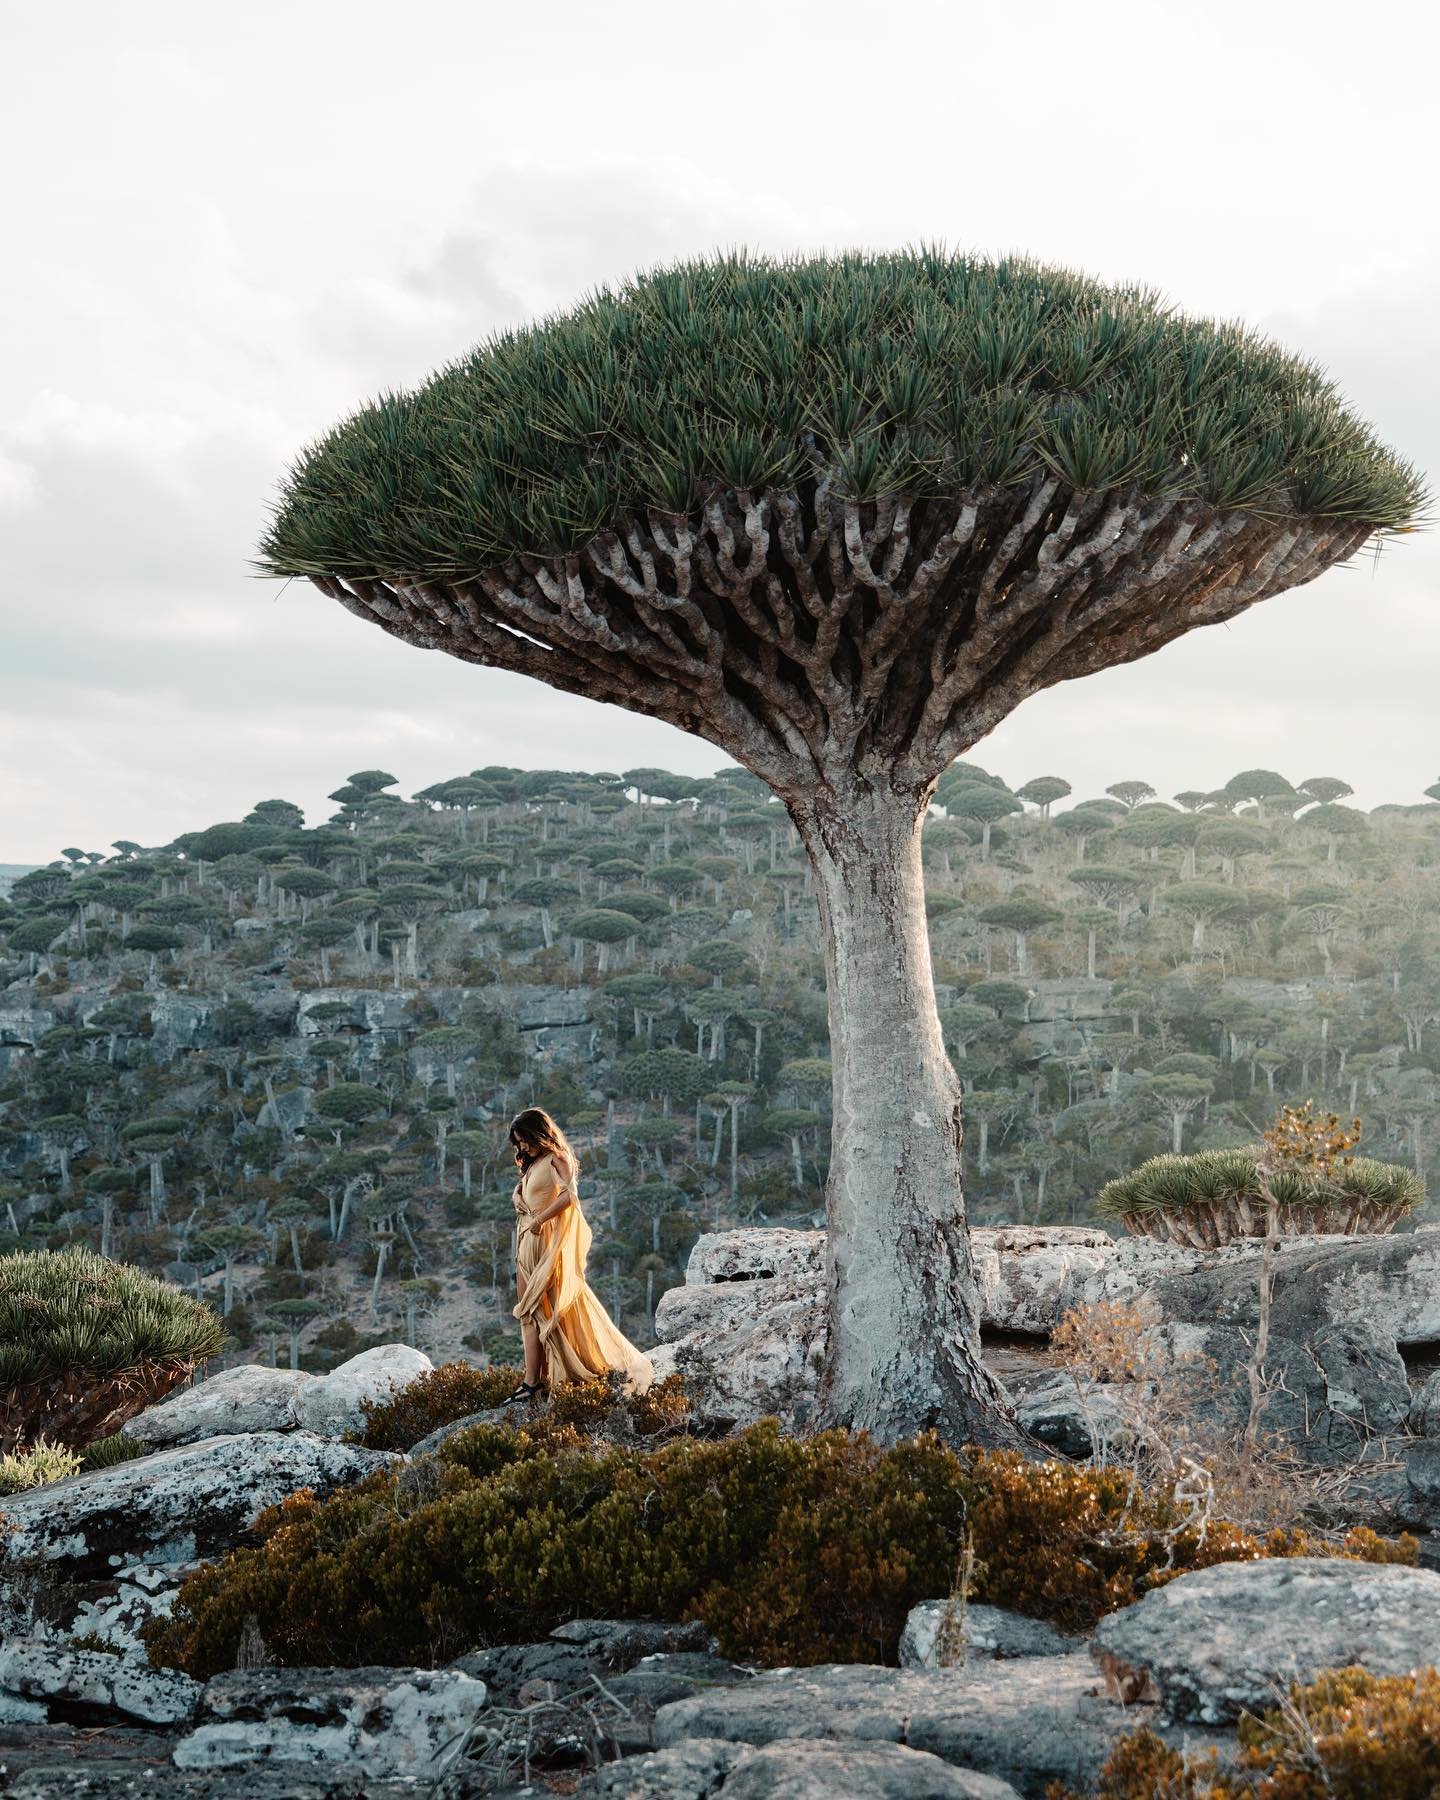 Welcome to Firmihin Forest, an alien-looking landscape of upturned, spindly Dragon&rsquo;s Blood trees&hellip; a plant species that only exists in this isolated Socotra archipelago.

So no wonder it looks like another planet &mdash; because no where 